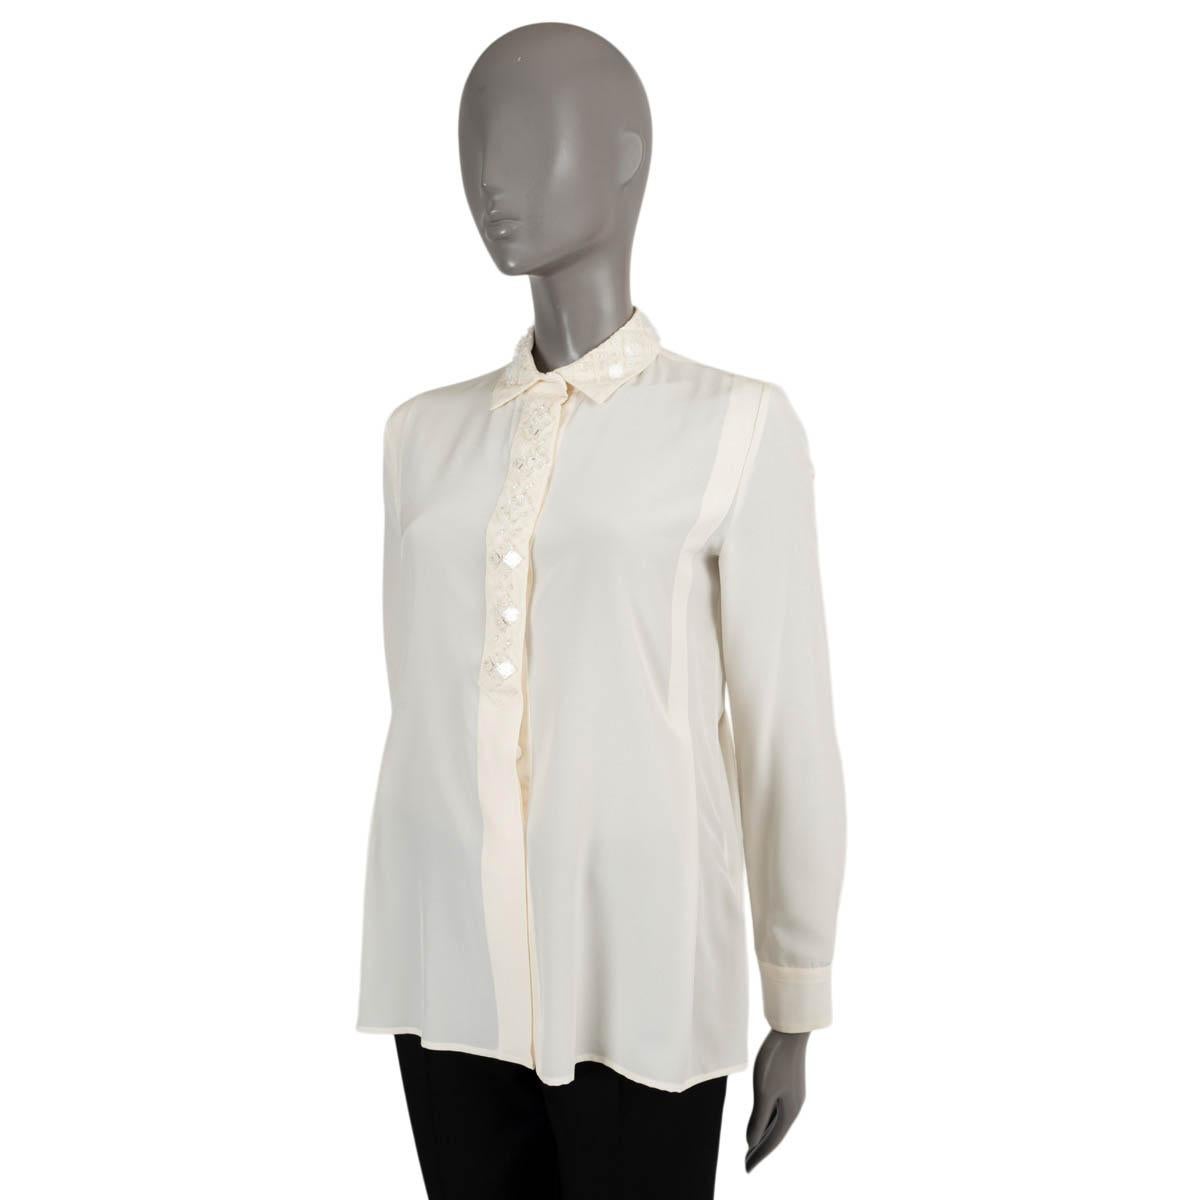 100% authentic Bottega Veneta semi-sheer blouse in cream silk (100%). Features a quilted collar encrusted with clear rhinestones with square beads on top. Opens with concealed buttons on the front. Has been worn and is in excellent condition.